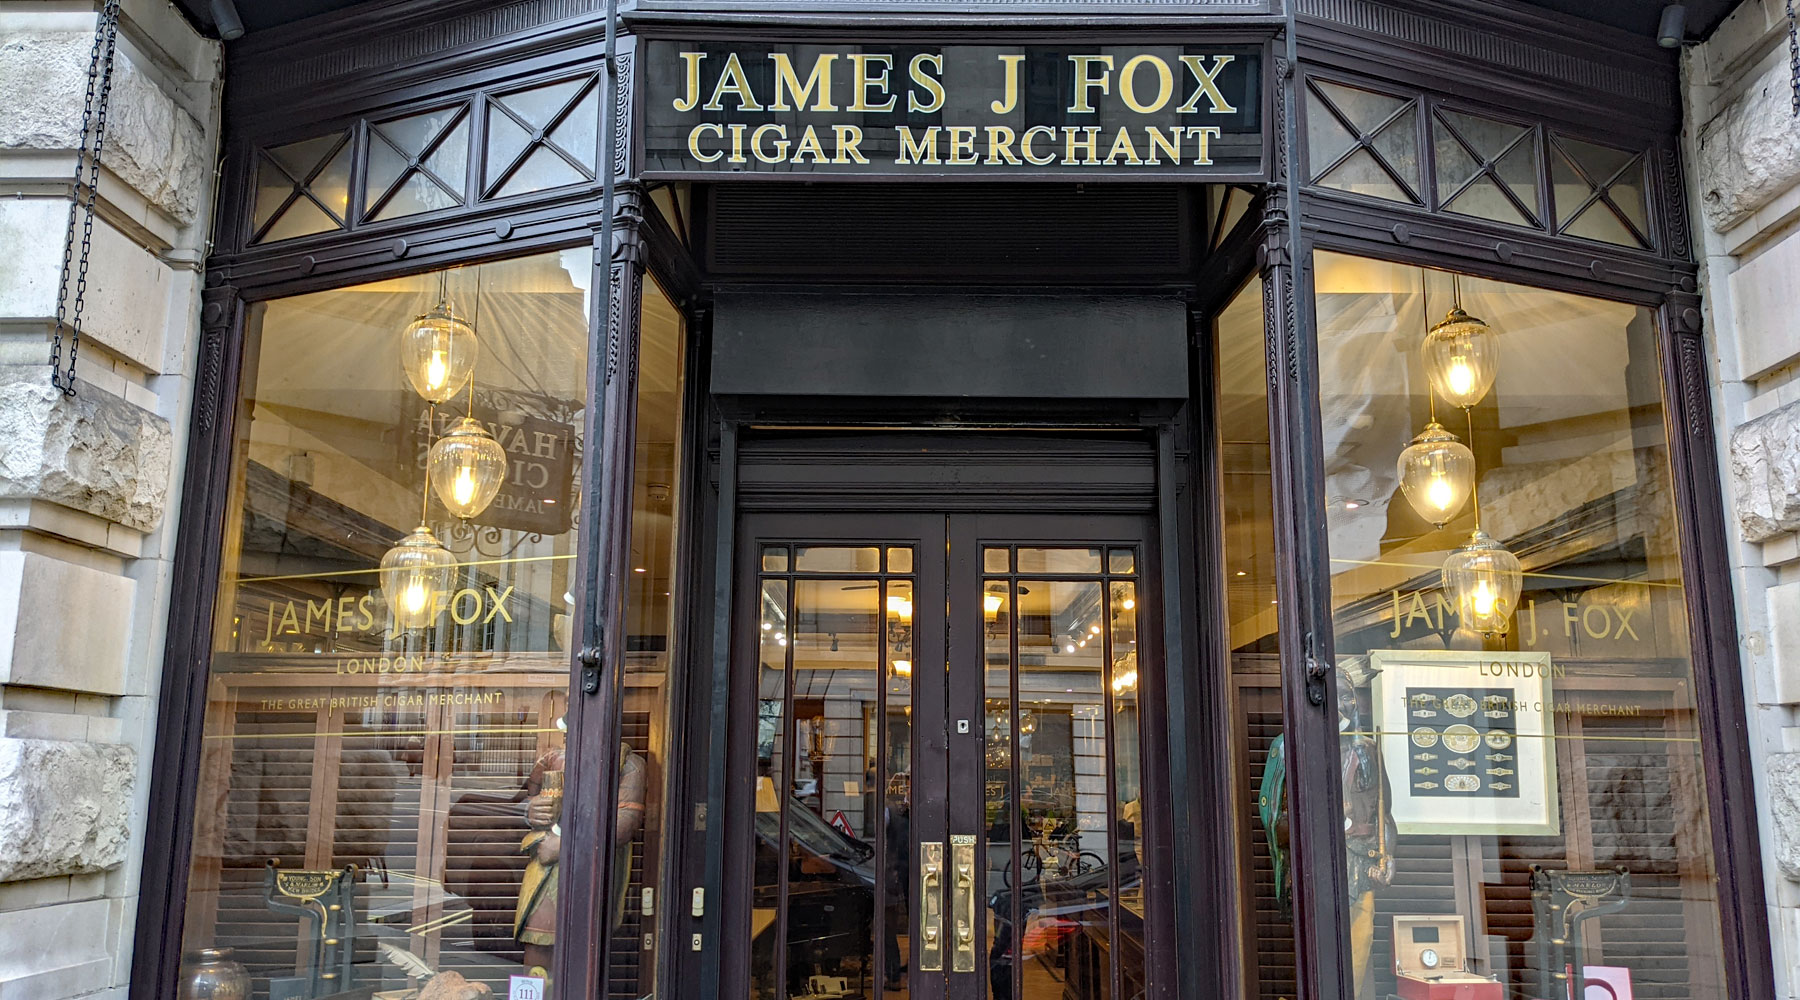 There's a museum in James J Fox, London's oldest cigar shop